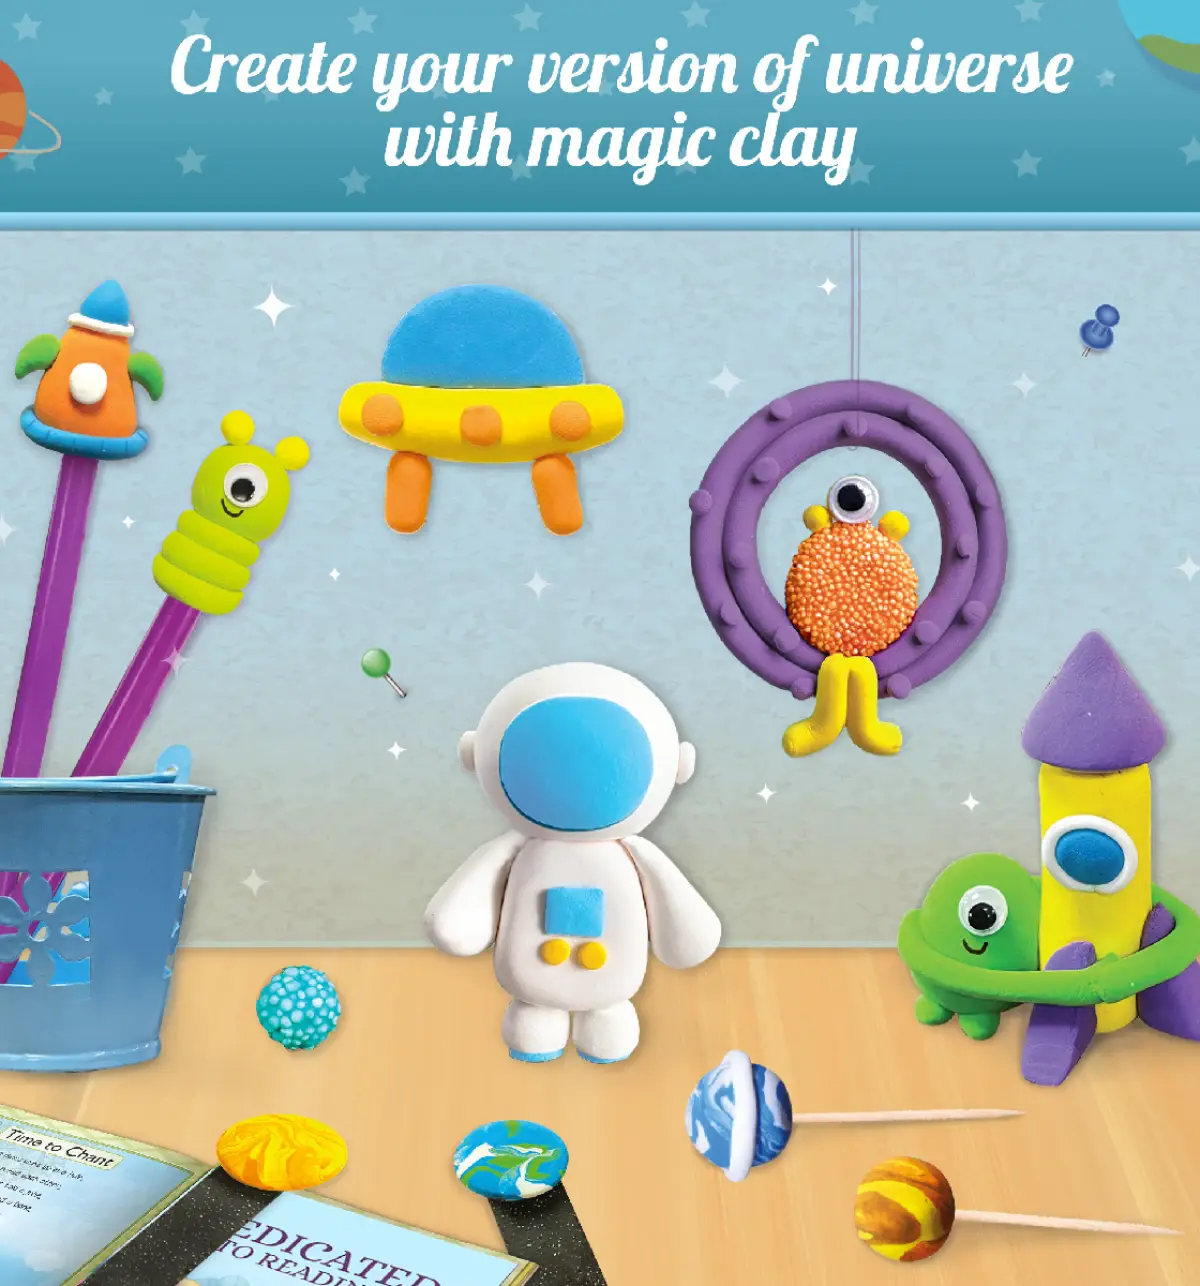 Imagimake Magic Clay Colour & Create Space Craft Kit, Air Dry Clay for Art & Craft, Make 10 Super Clay Creations, Kids for 5Y+, Multicolour